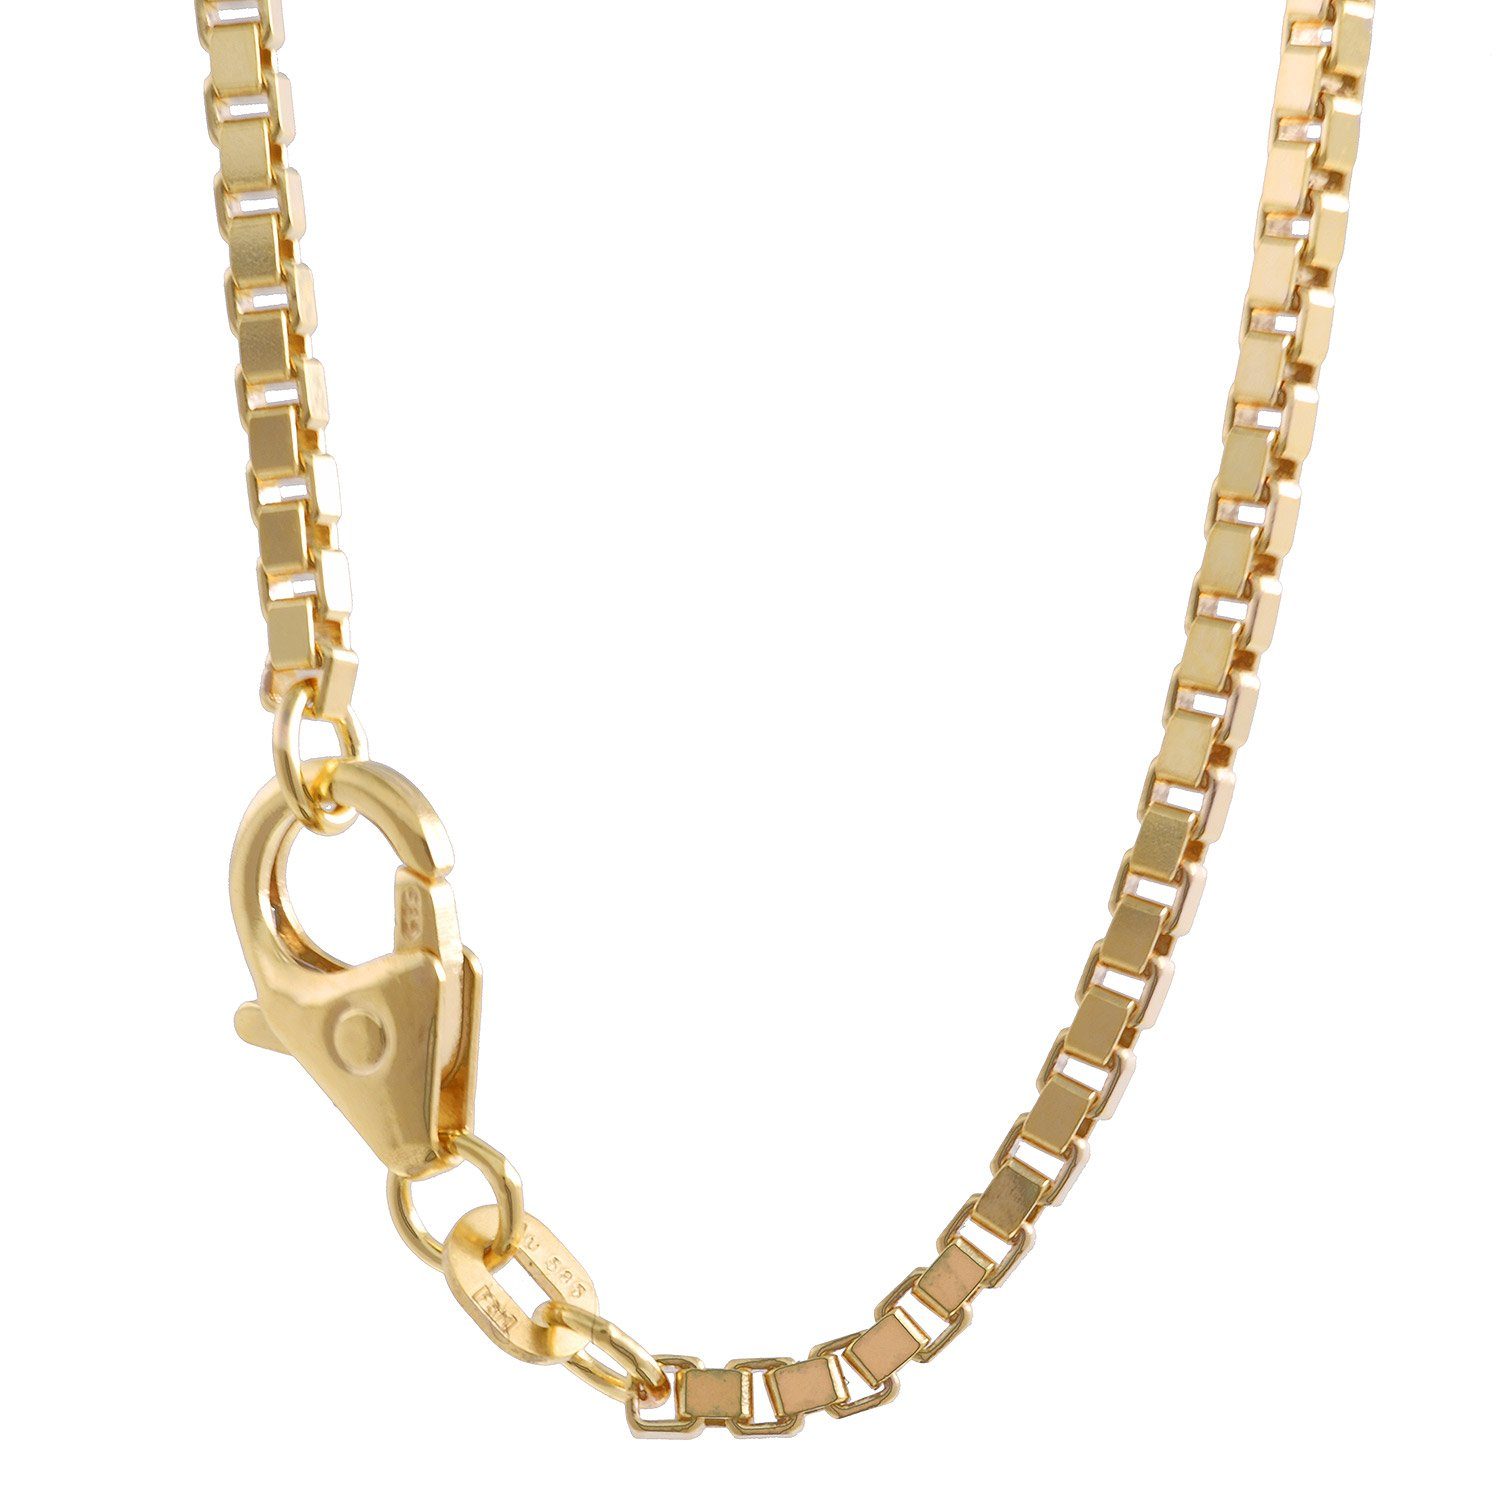 Goldkette, Made in Germany HOPLO